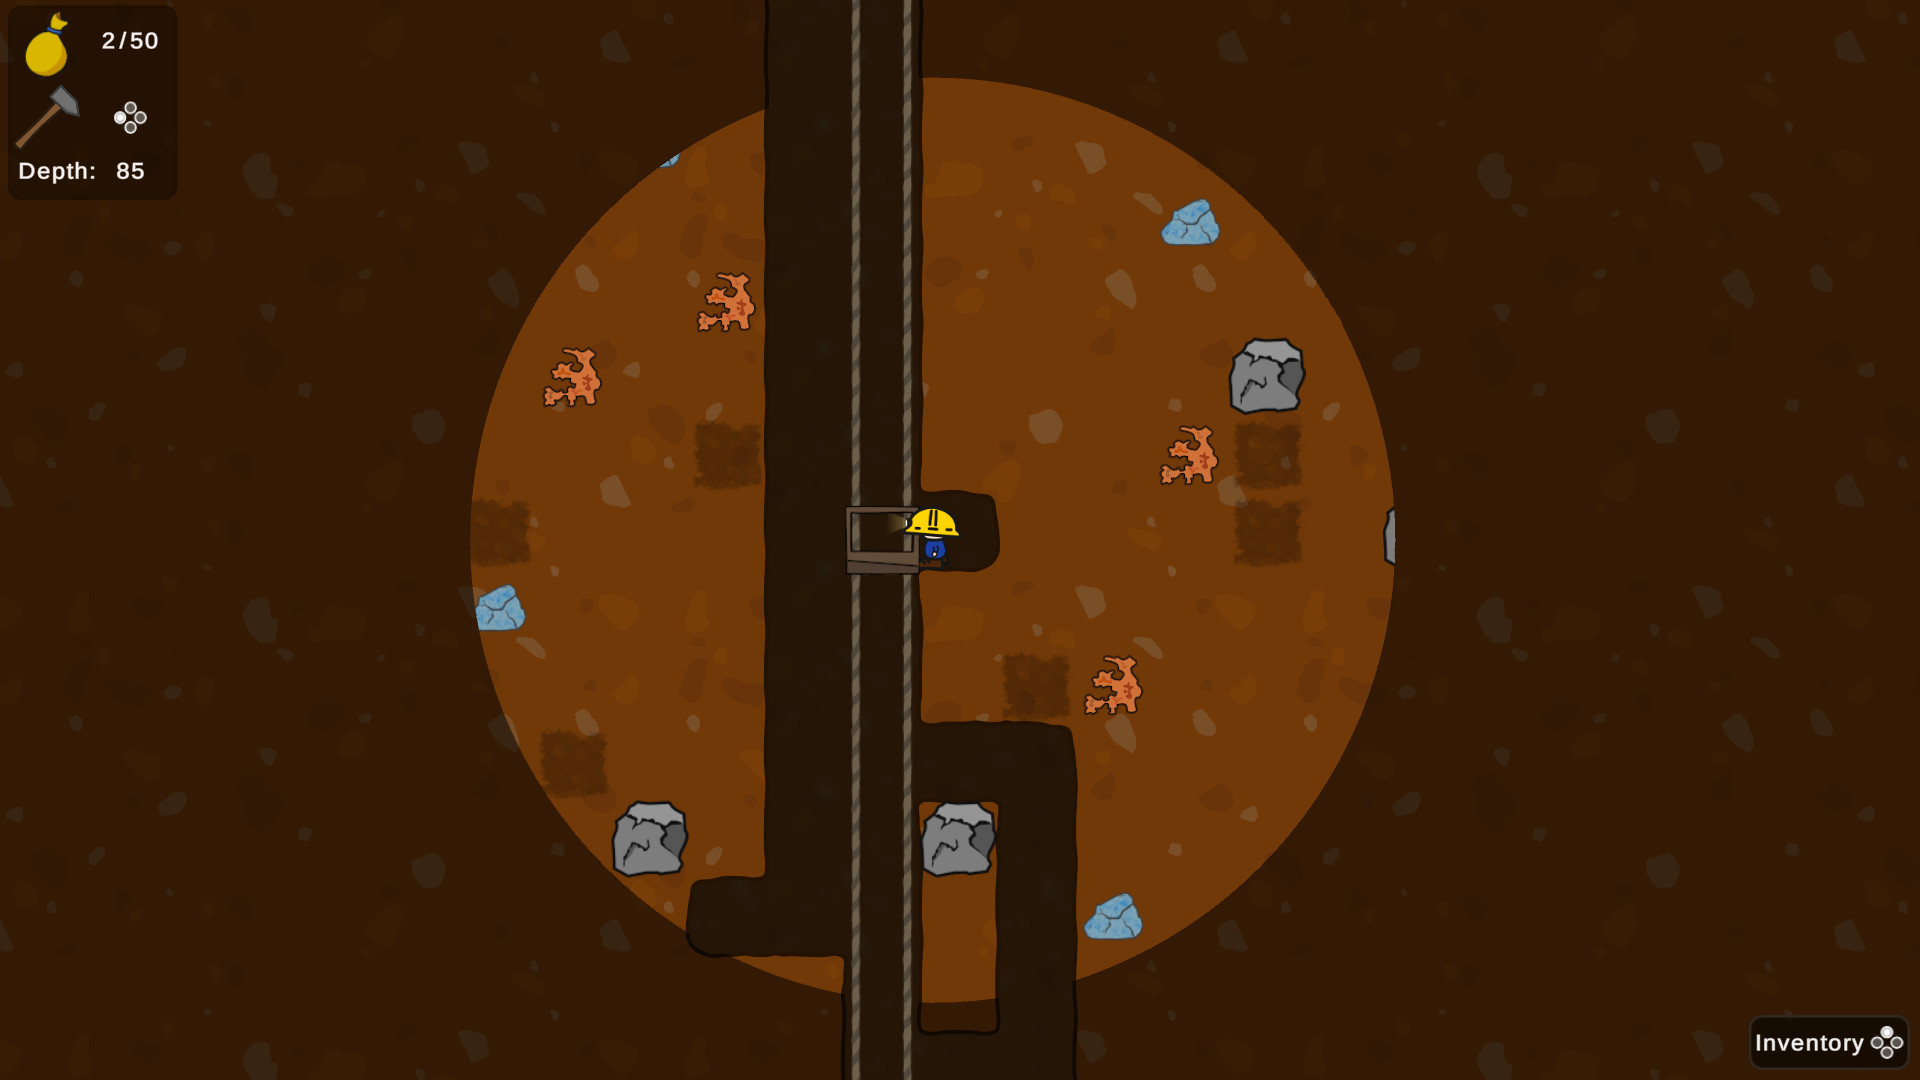 The sci-fi mining game Dig Deep is available now for free in the